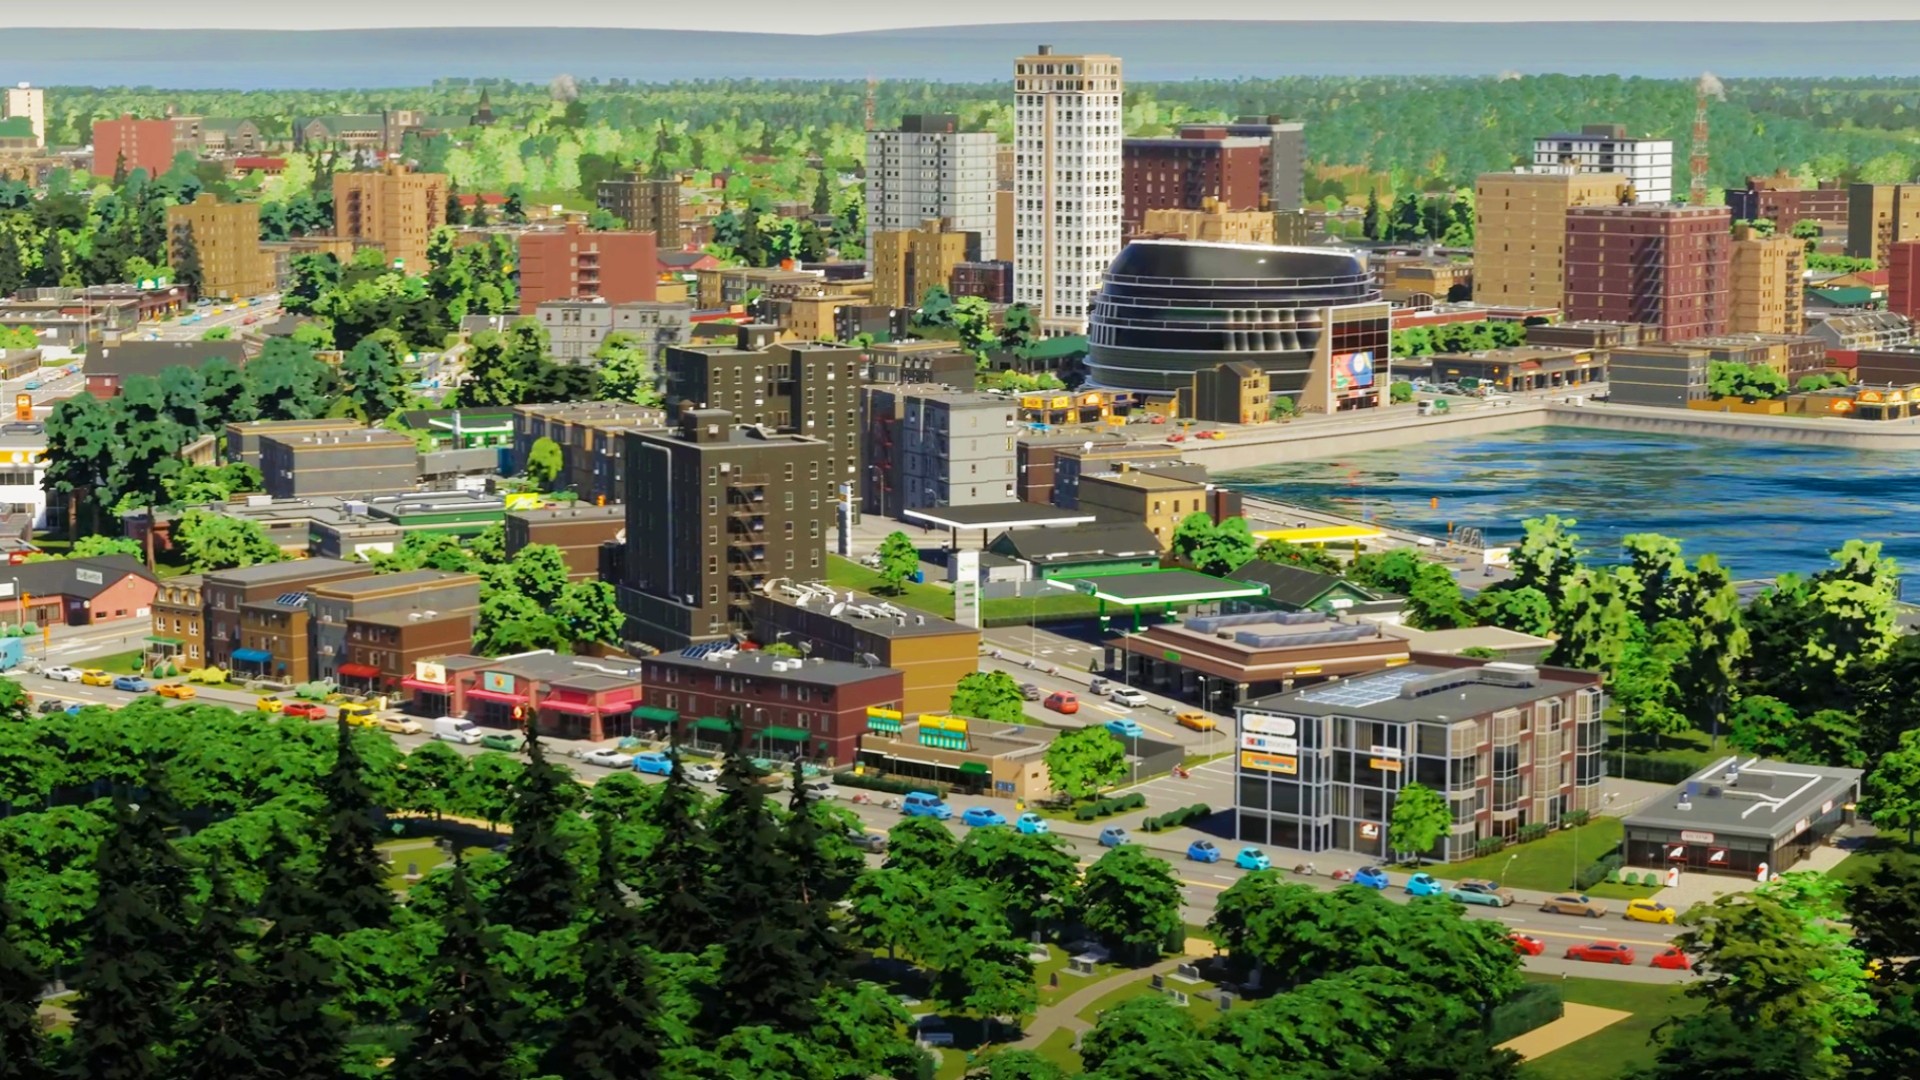 Cities Skylines 2 mods probably aren't coming any time soon